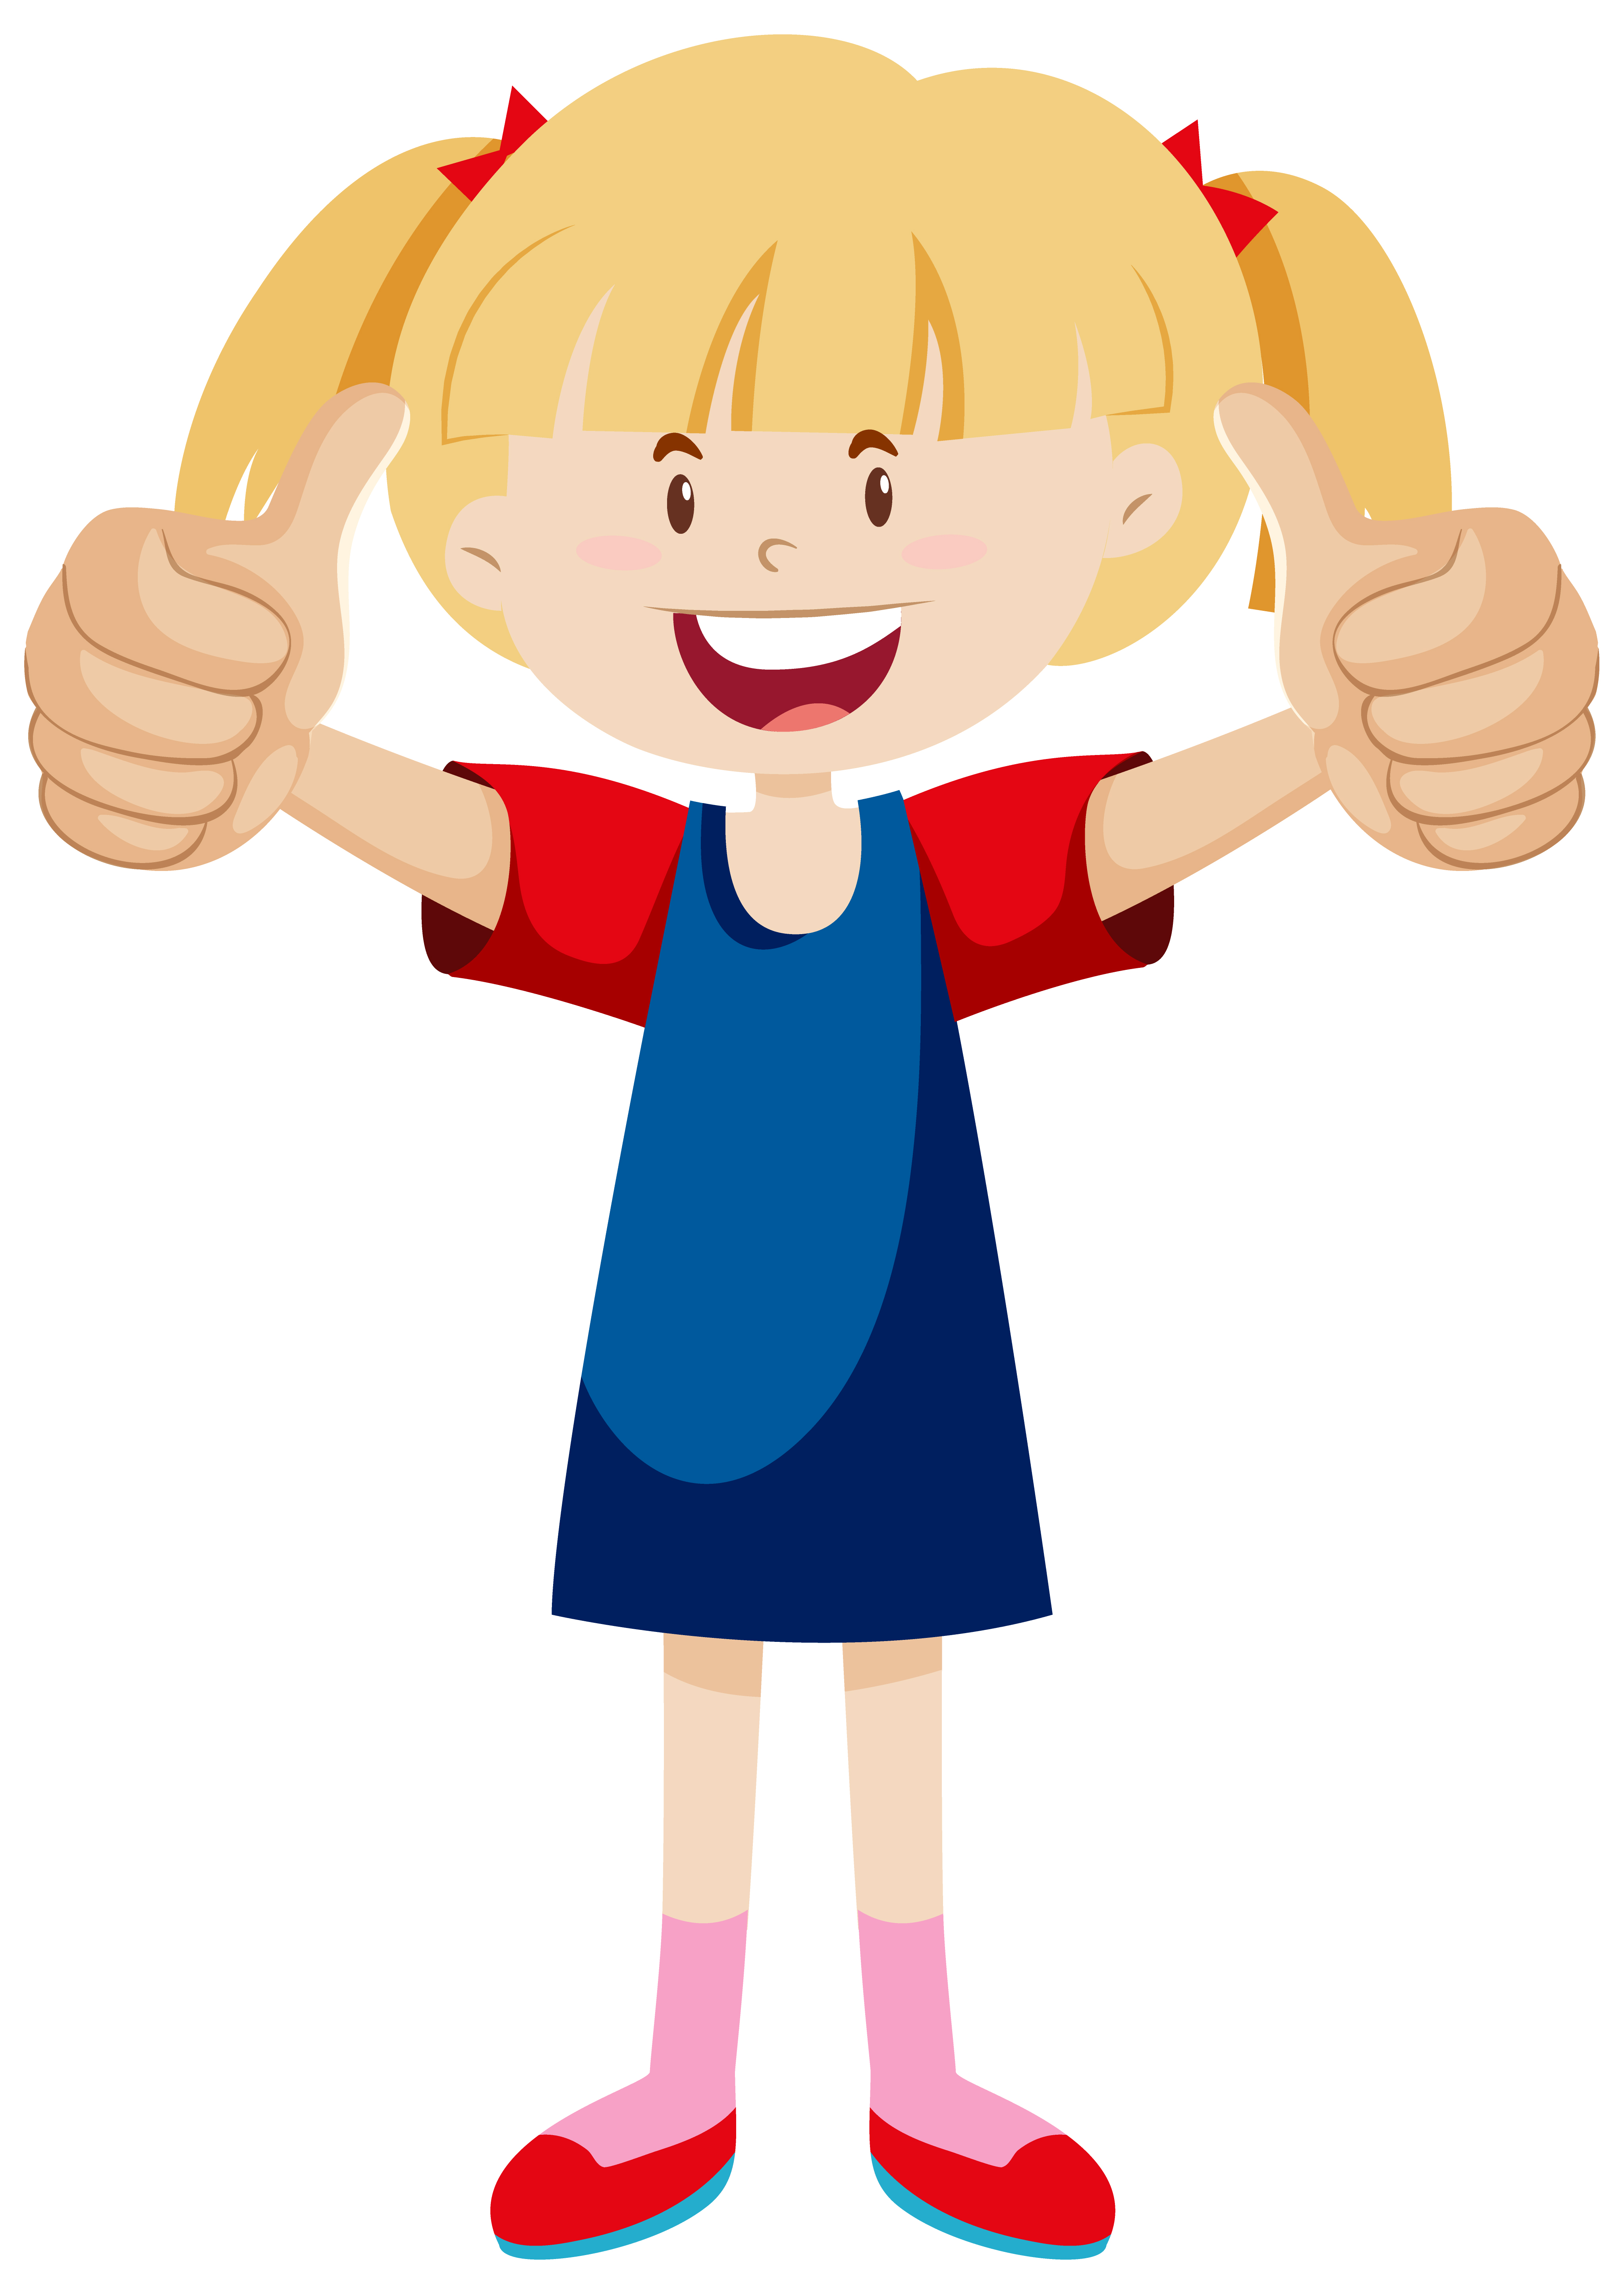 Kid Thumbs Up Vector Art, Icons, and Graphics for Free Download